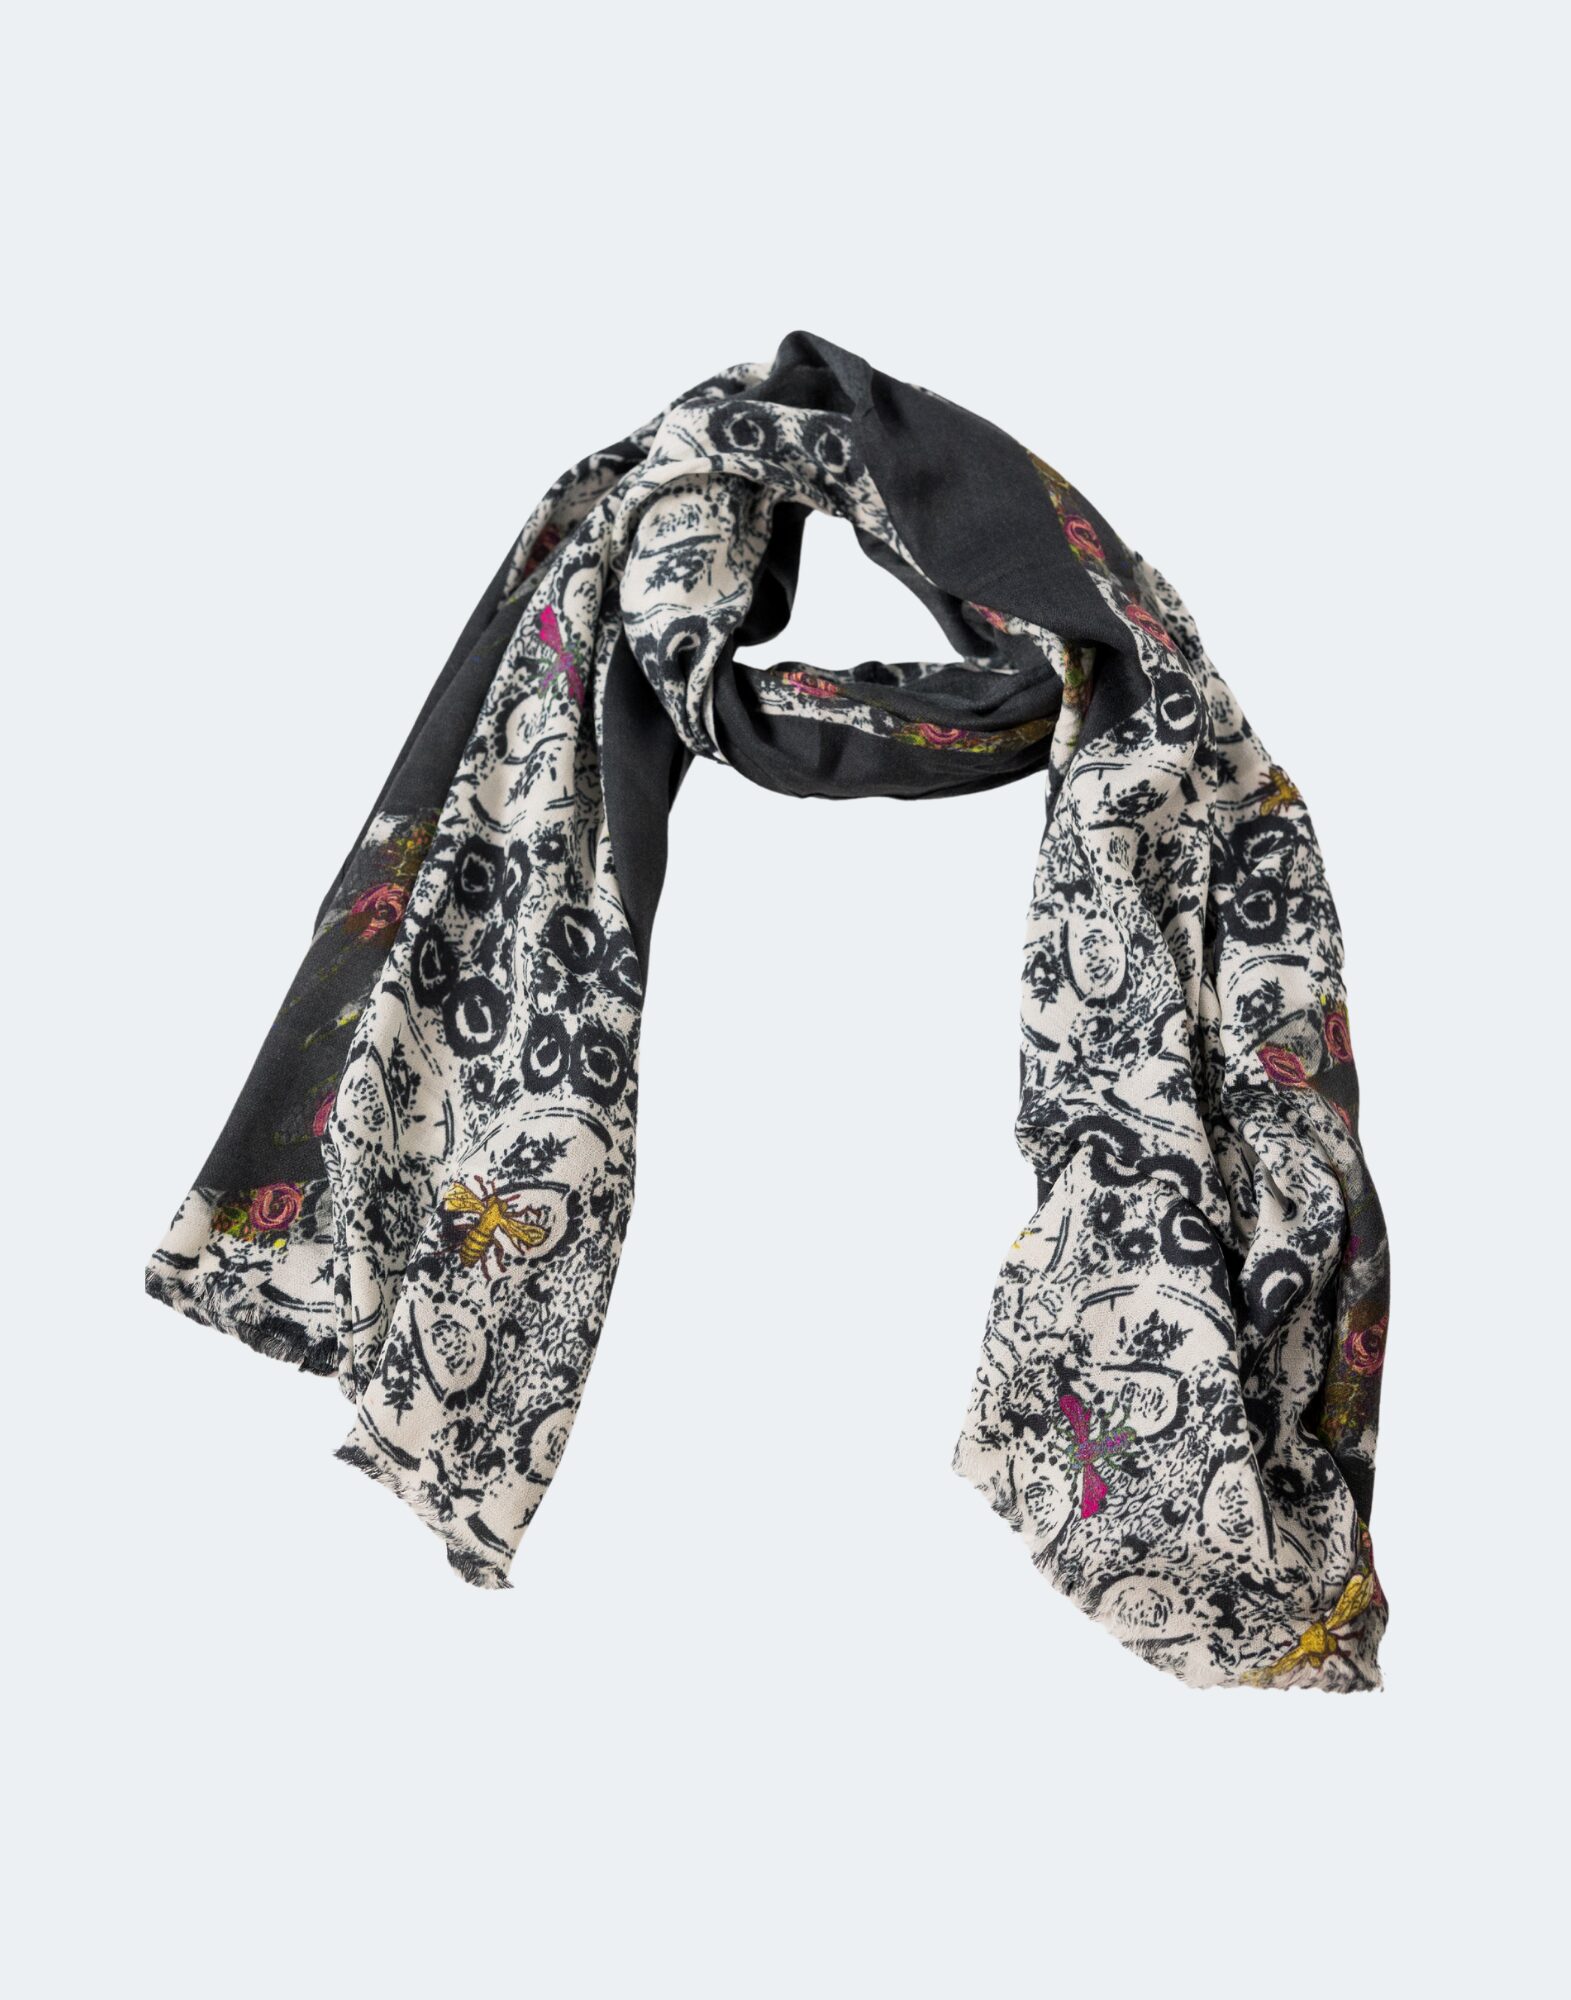 black and white scarf with hands and roses in the print